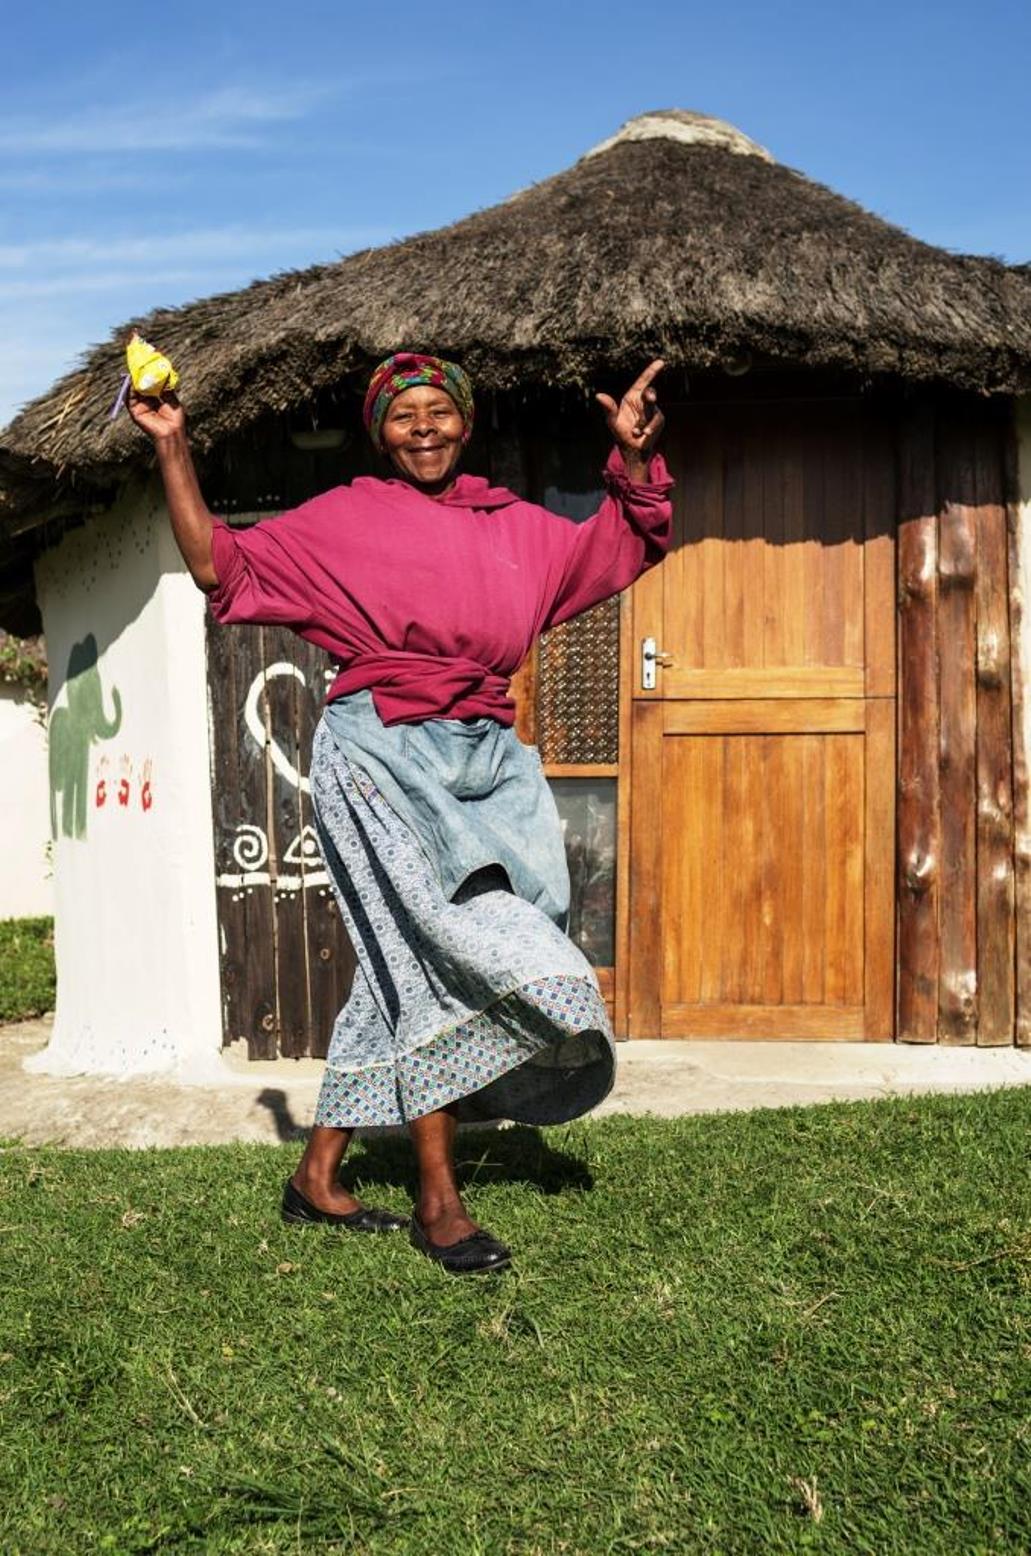 A Xhosa woman seen on a village tour conducted by the community-based cooperative Mdumbi Backpackers in South Africa. Proceeds support the local community. Photo courtesy of visit.org